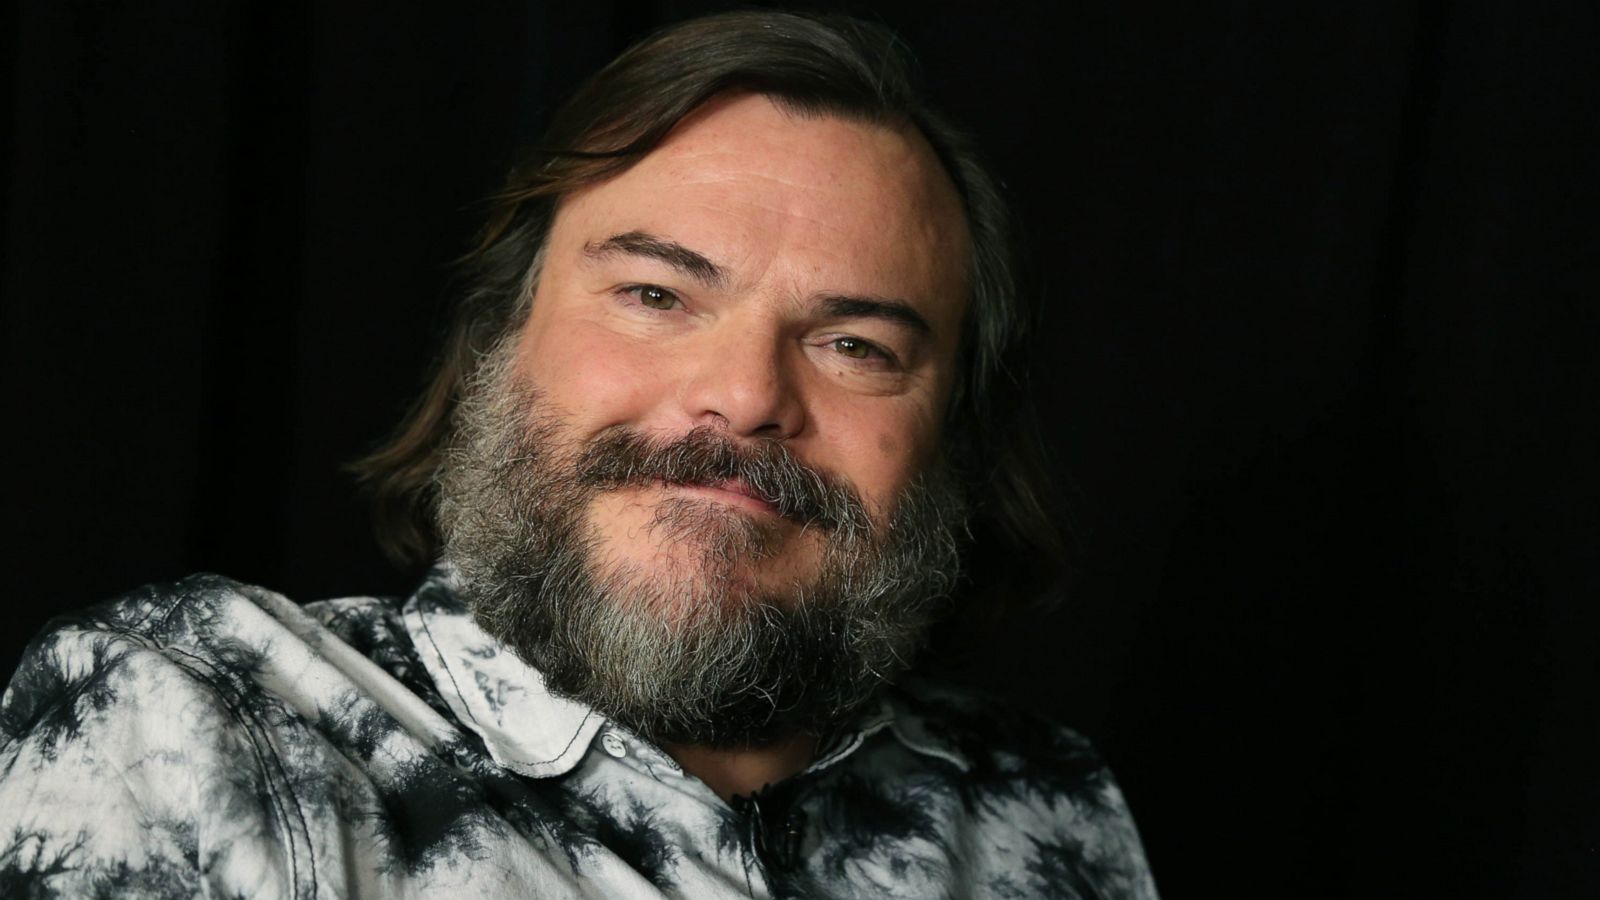 Jumanji: The Next Level star Jack Black says he 'could use a